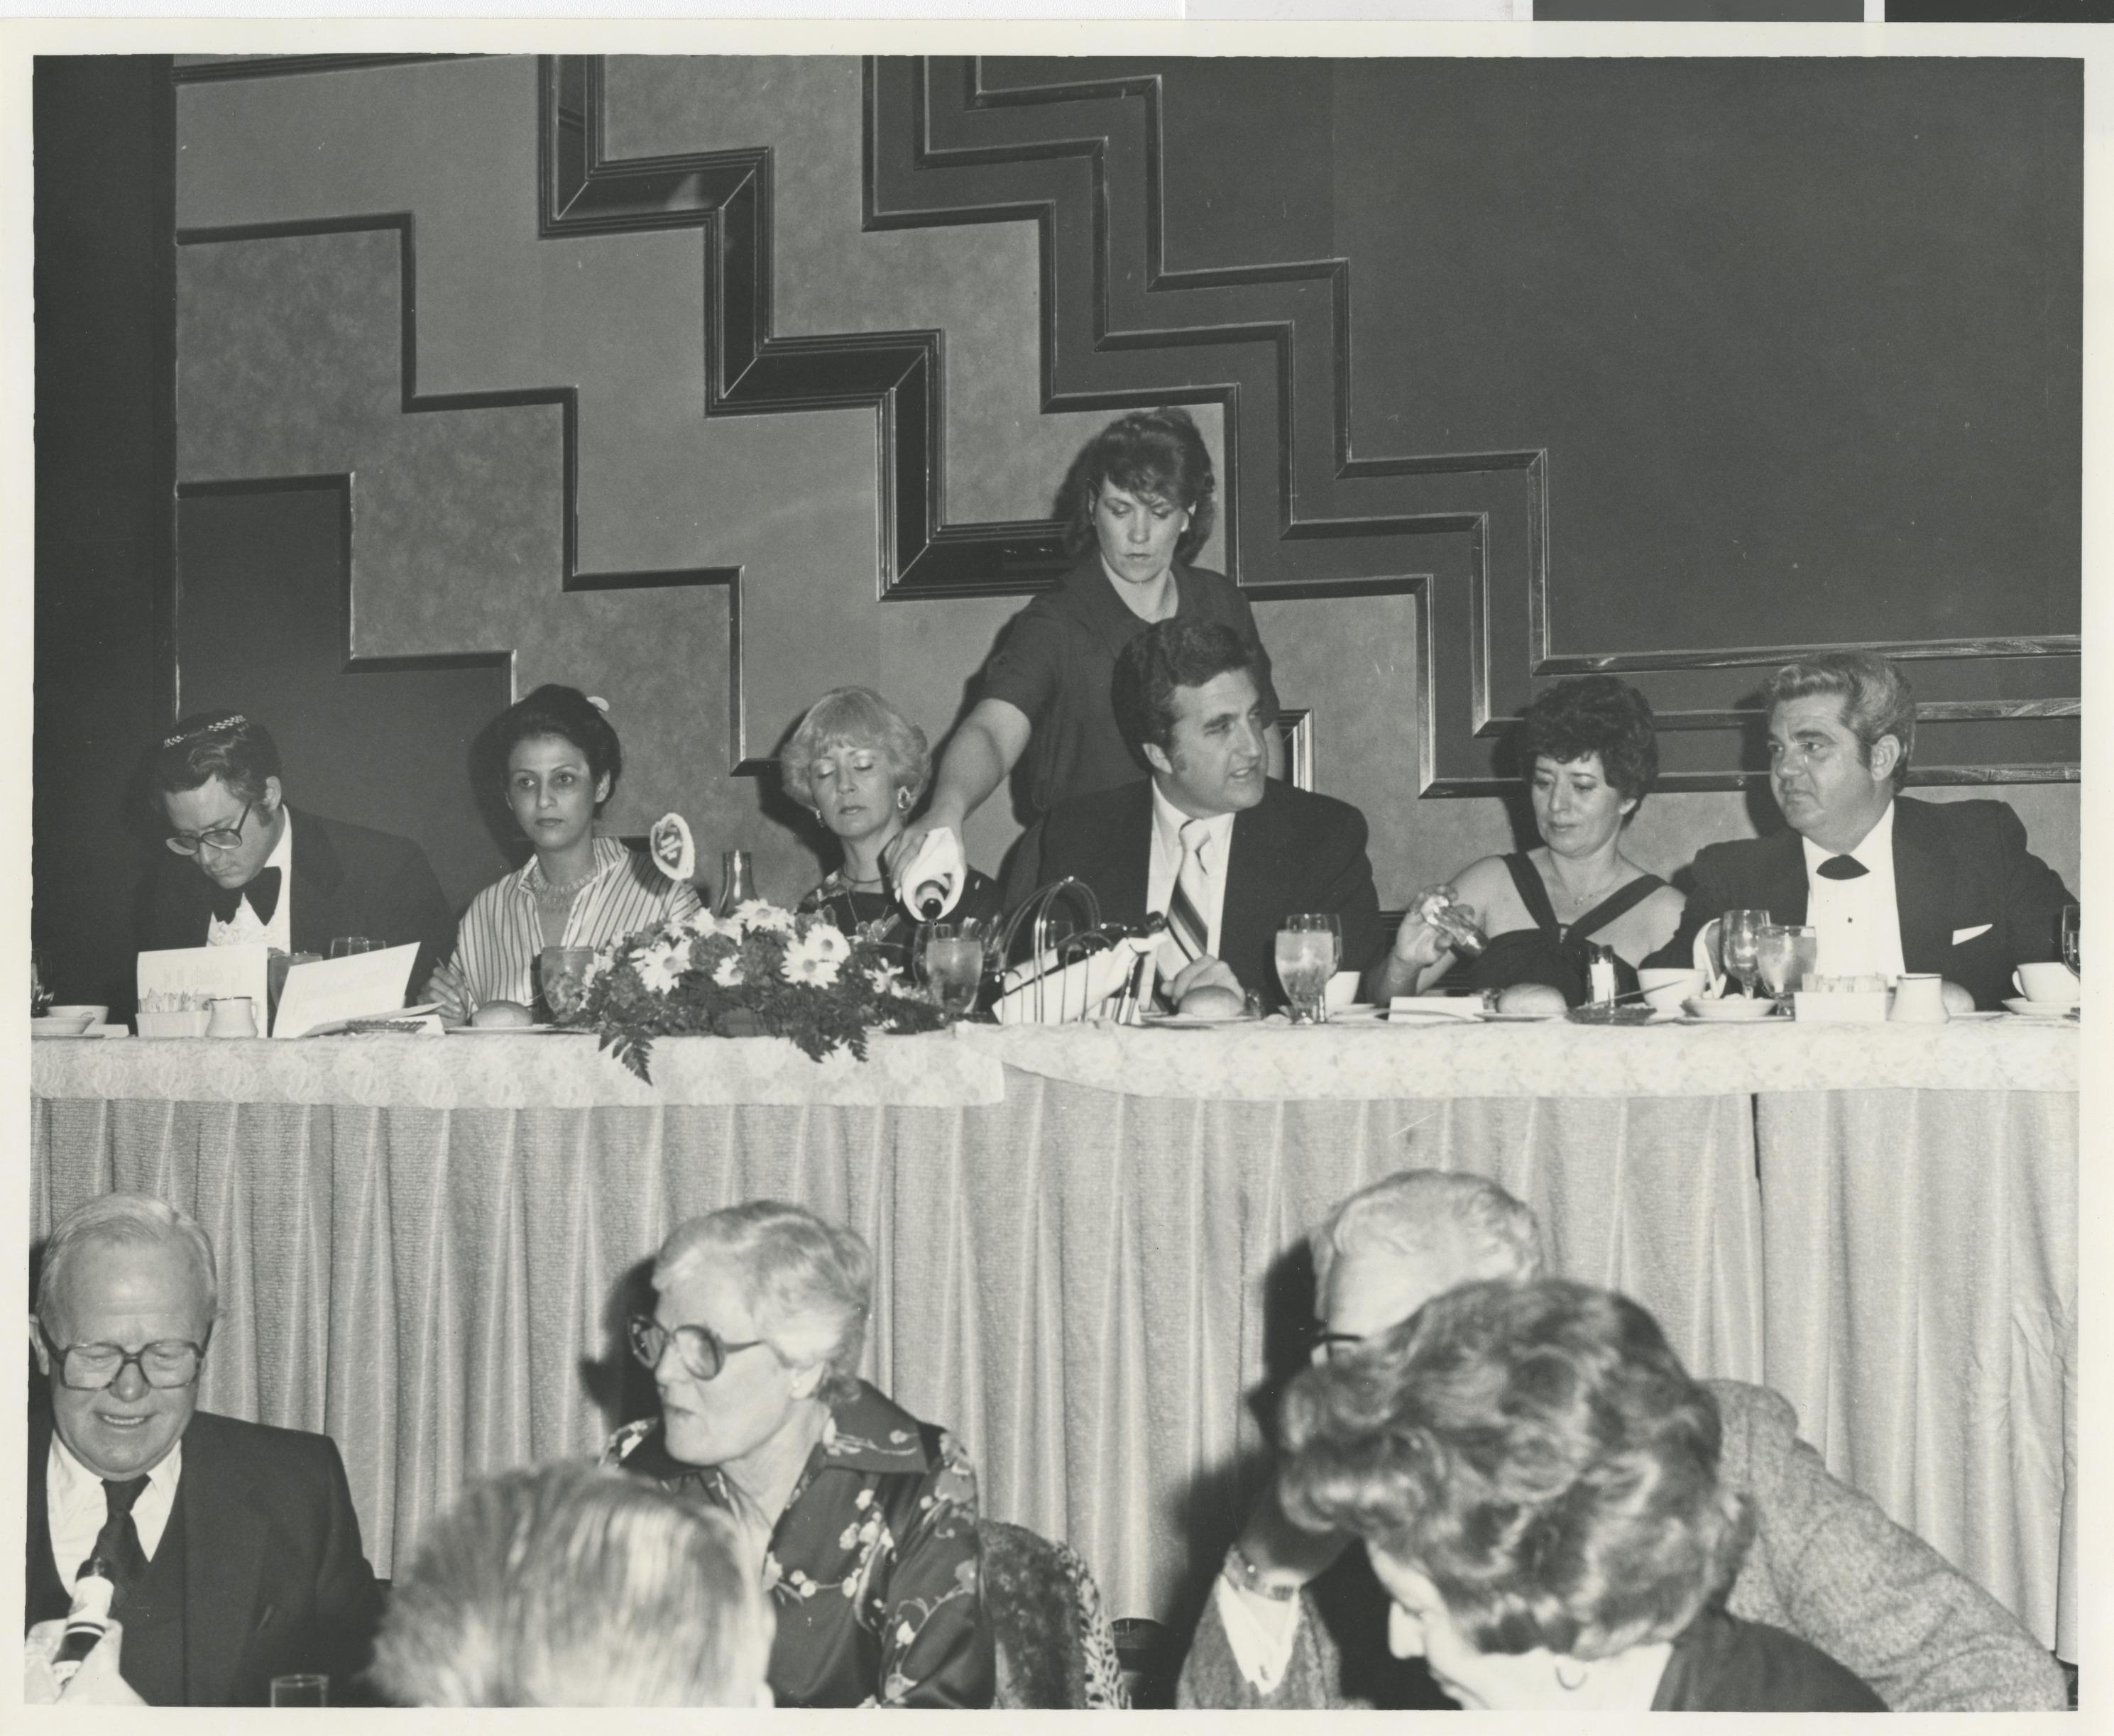 Photograph of an event for the American Jewish Committee